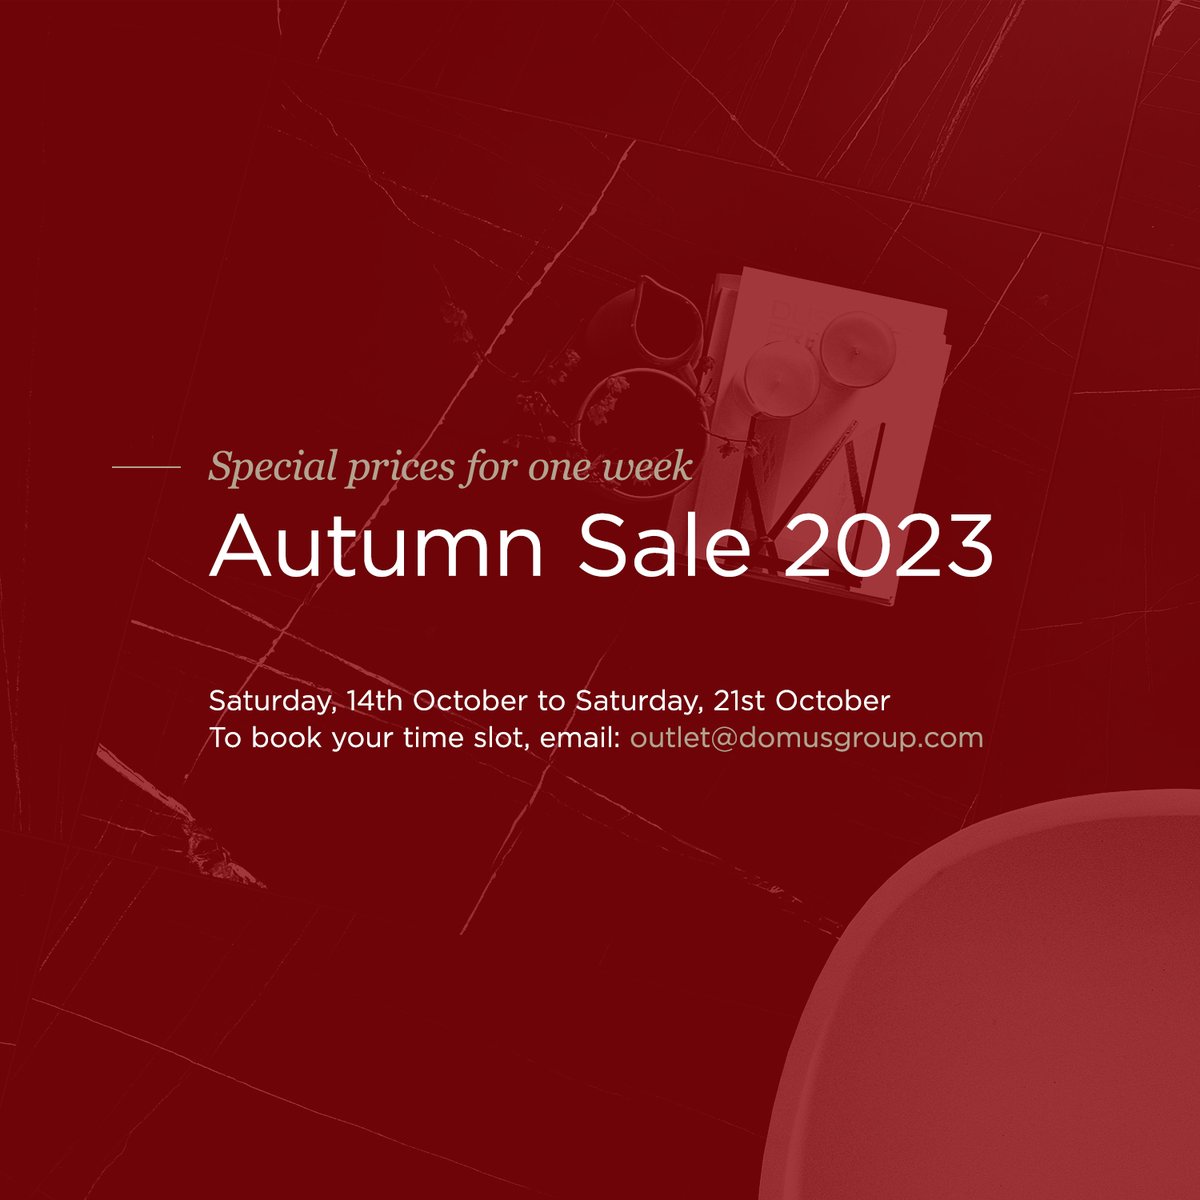 📢For huge savings on high-quality tiles and engineered flooring, don’t miss our big discount Autumn Sale taking place at the Domus Outlet showroom in Surrey from Saturday 14th – Saturday 21st October. Read more and plan your visit: domusgroup.com/articles/outle…